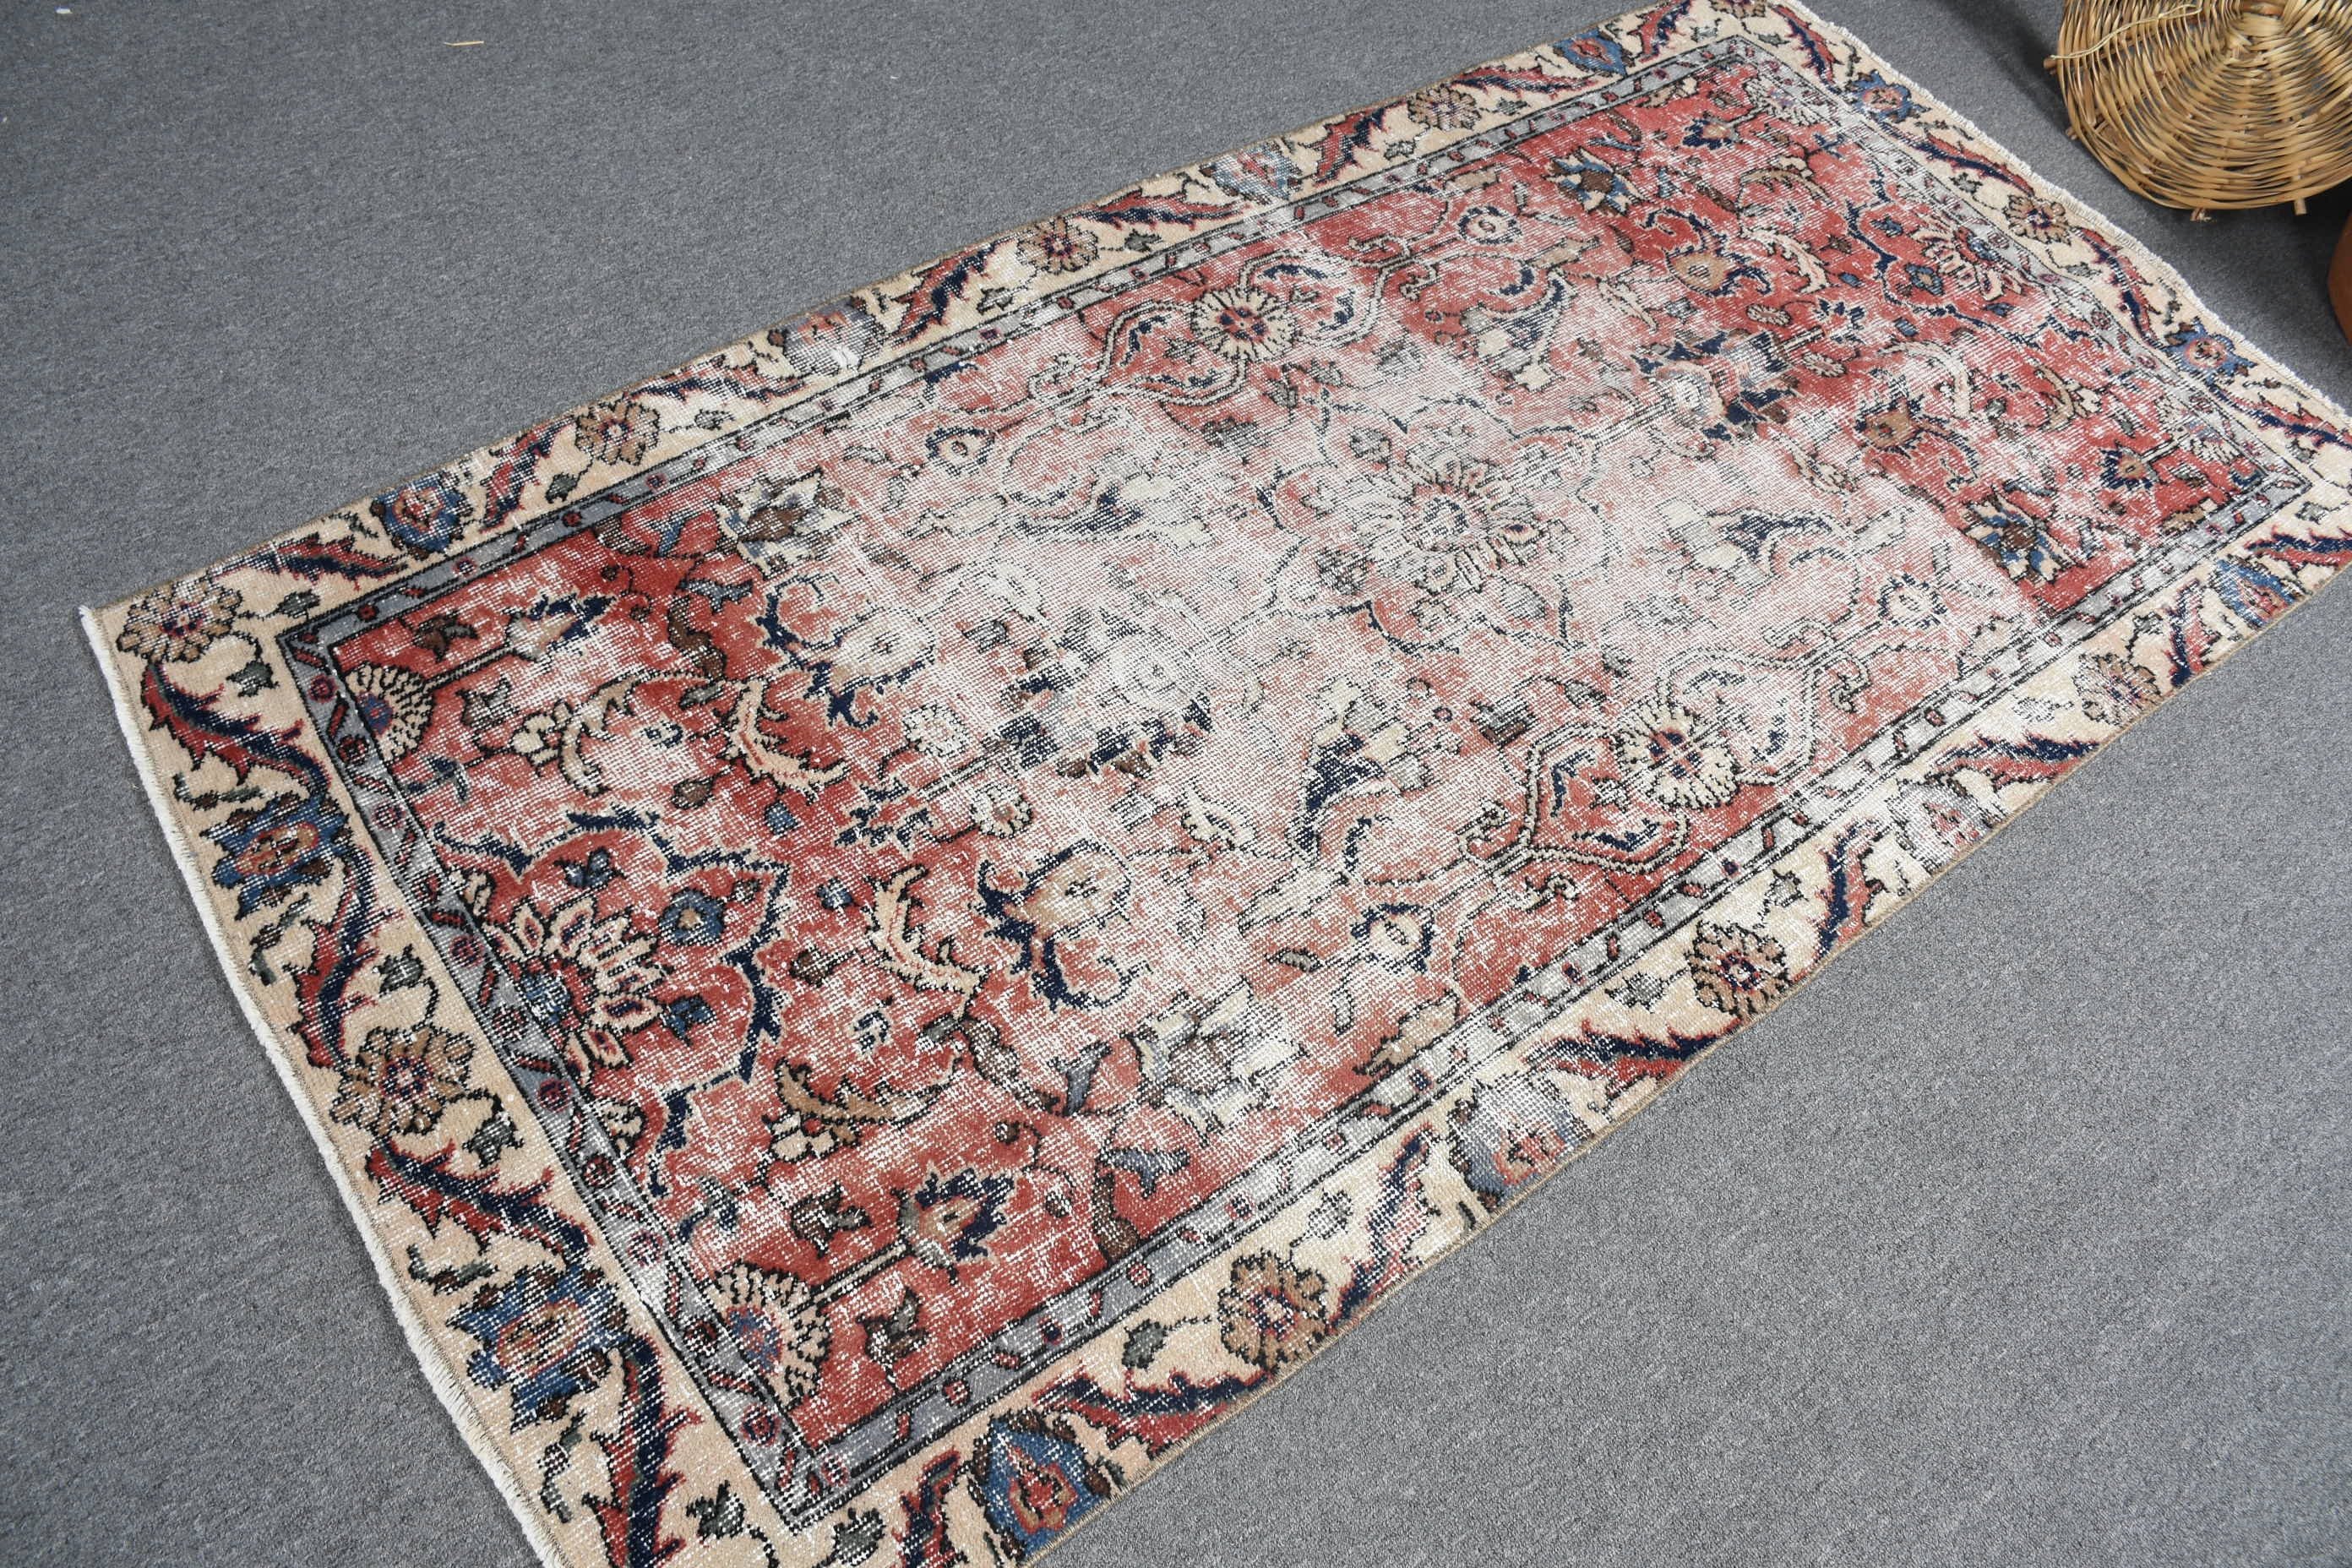 Outdoor Rug, Oriental Rugs, Turkish Rugs, Cool Rug, Rugs for Kitchen, Red Bedroom Rug, Entry Rugs, Vintage Rugs, 3.4x6 ft Accent Rug